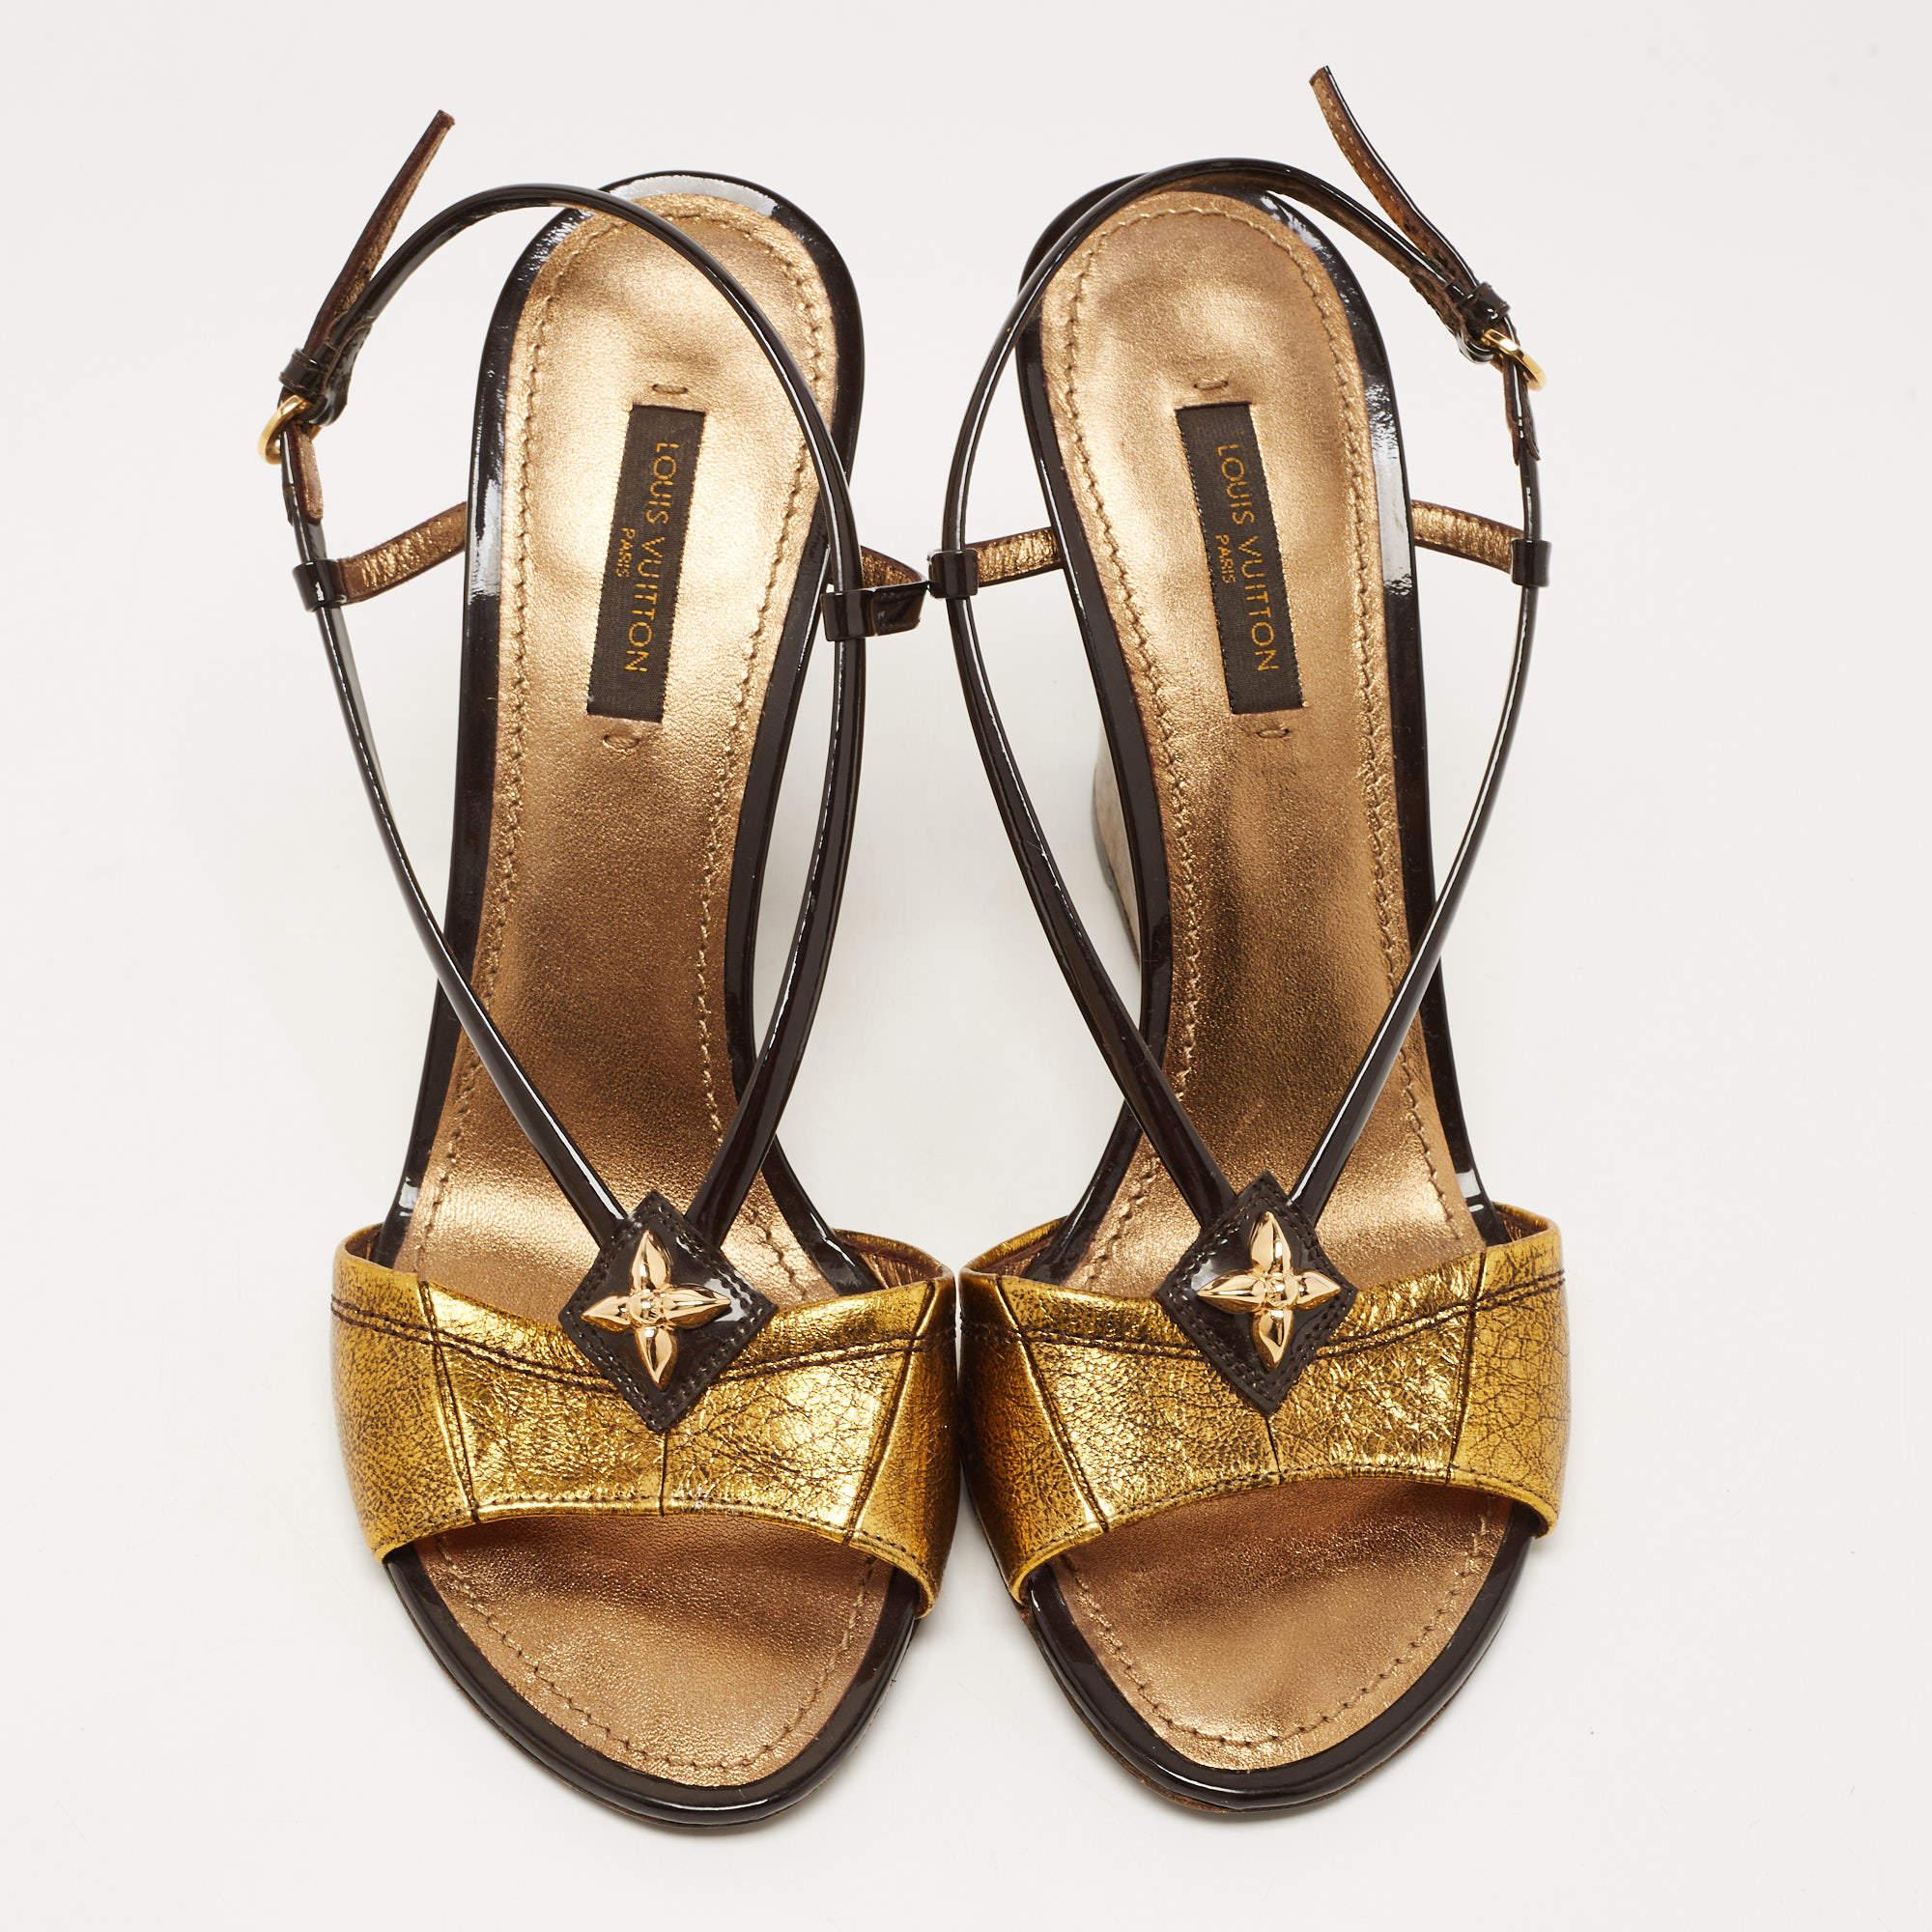 Louis Vuitton Metallic/Brown Leather and Patent Slingback Wedge Sandals Size 37 In Good Condition For Sale In Dubai, Al Qouz 2